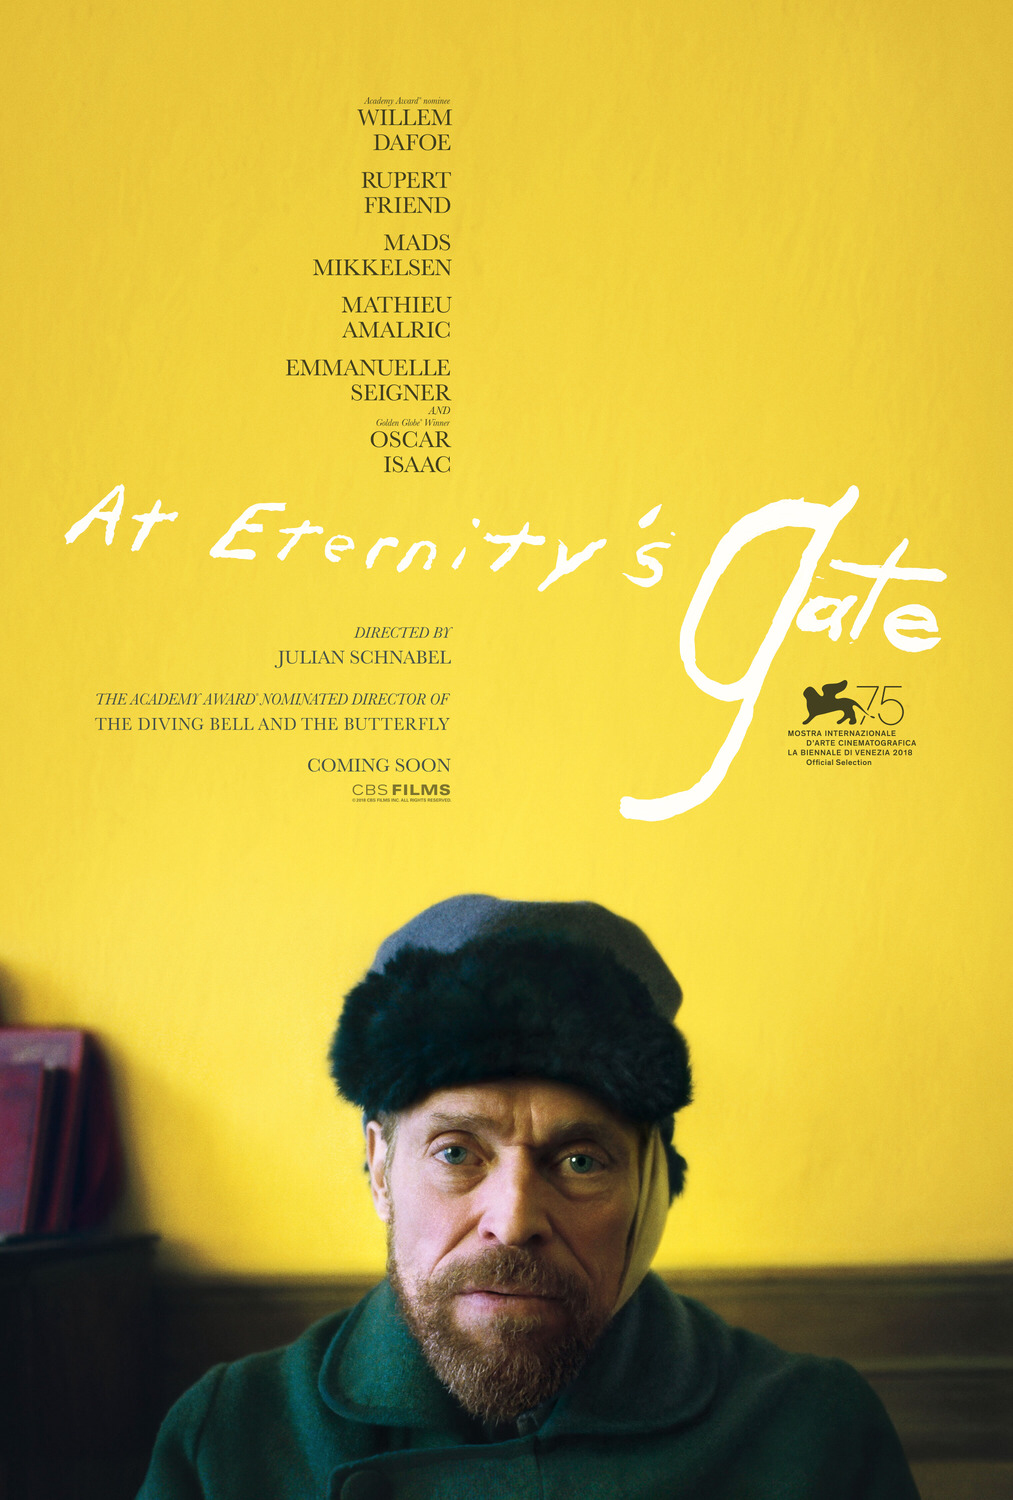 “At Eternity’s Gate”: Too Much Van Gogh Ruins the Art